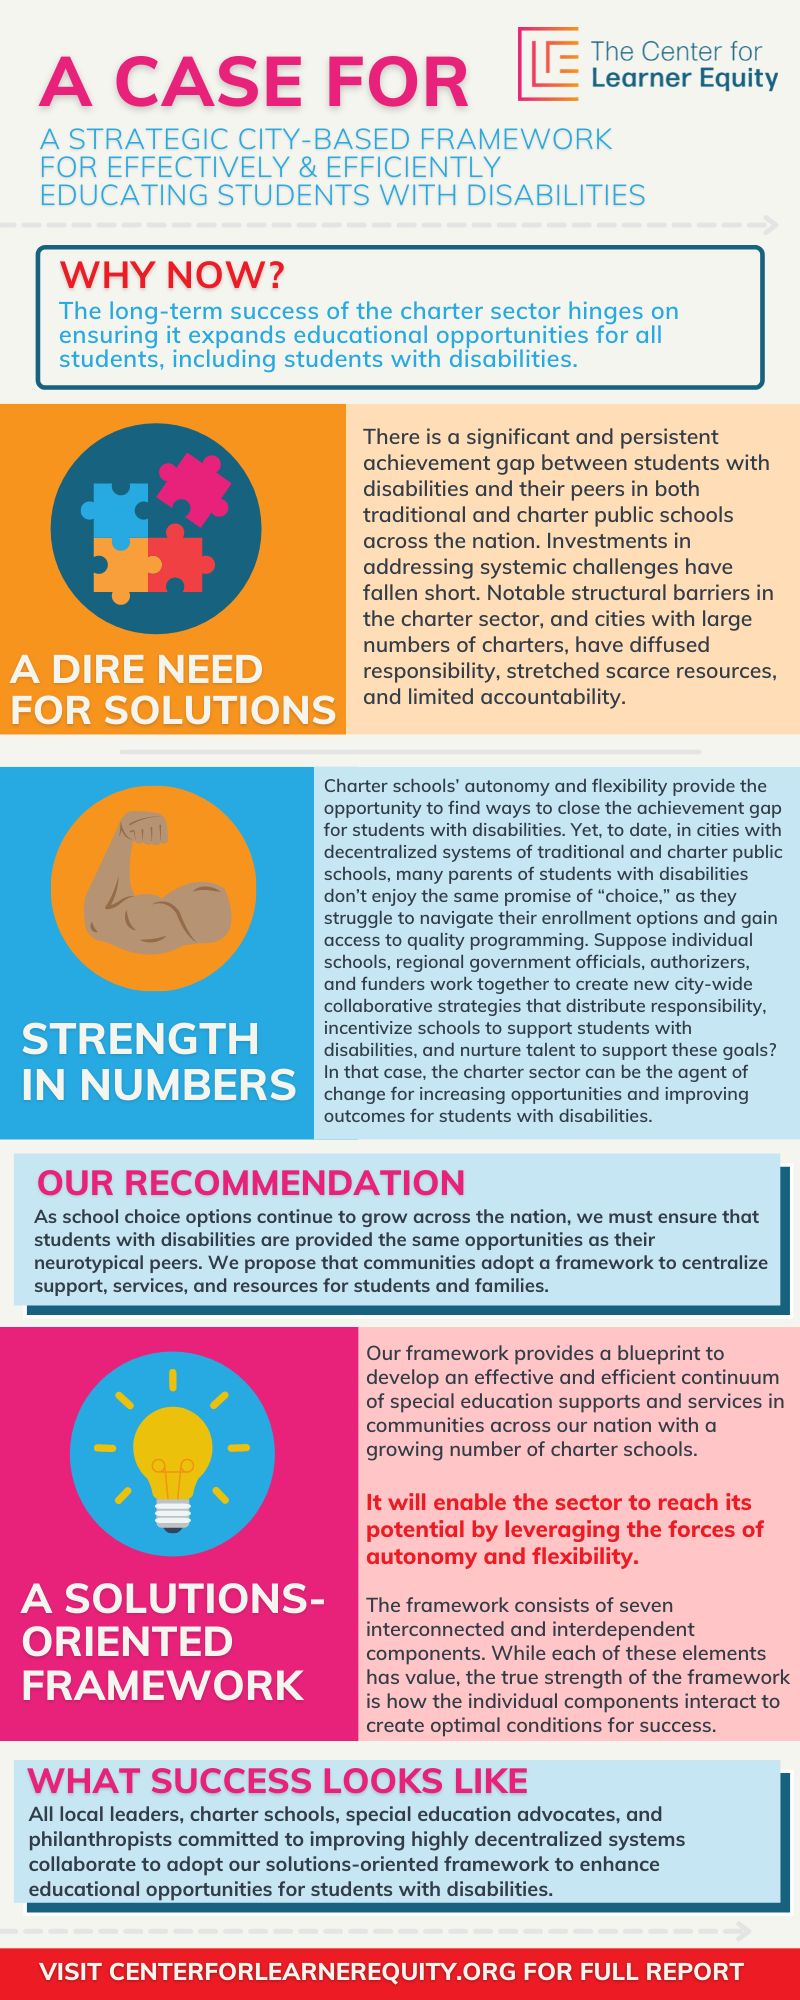 A Case for a Strategic City-based Framework for Educating Students with Disabilities Infographic